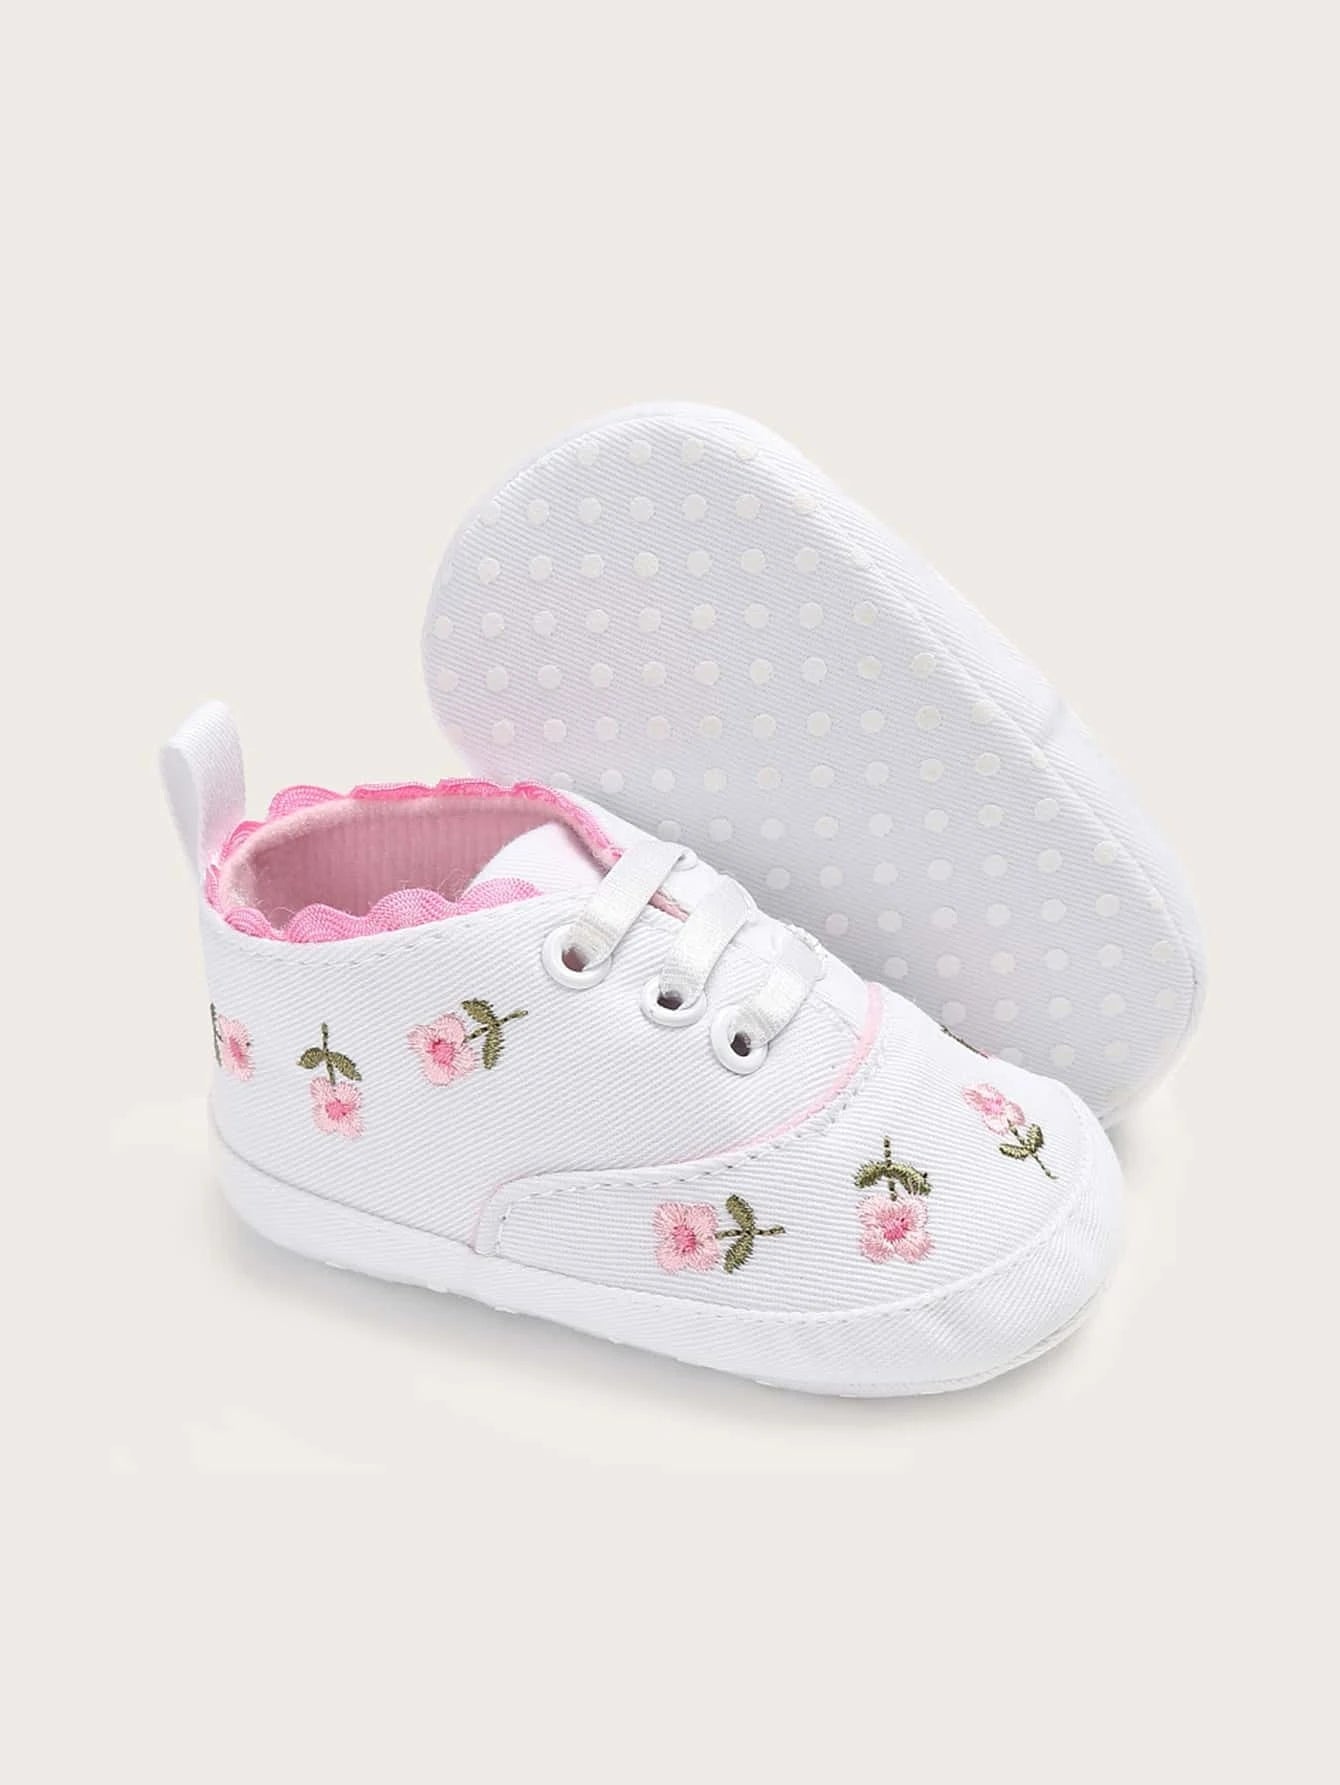 SHEIN Baby Girl Floral Embroidered Lace-up Front Flats